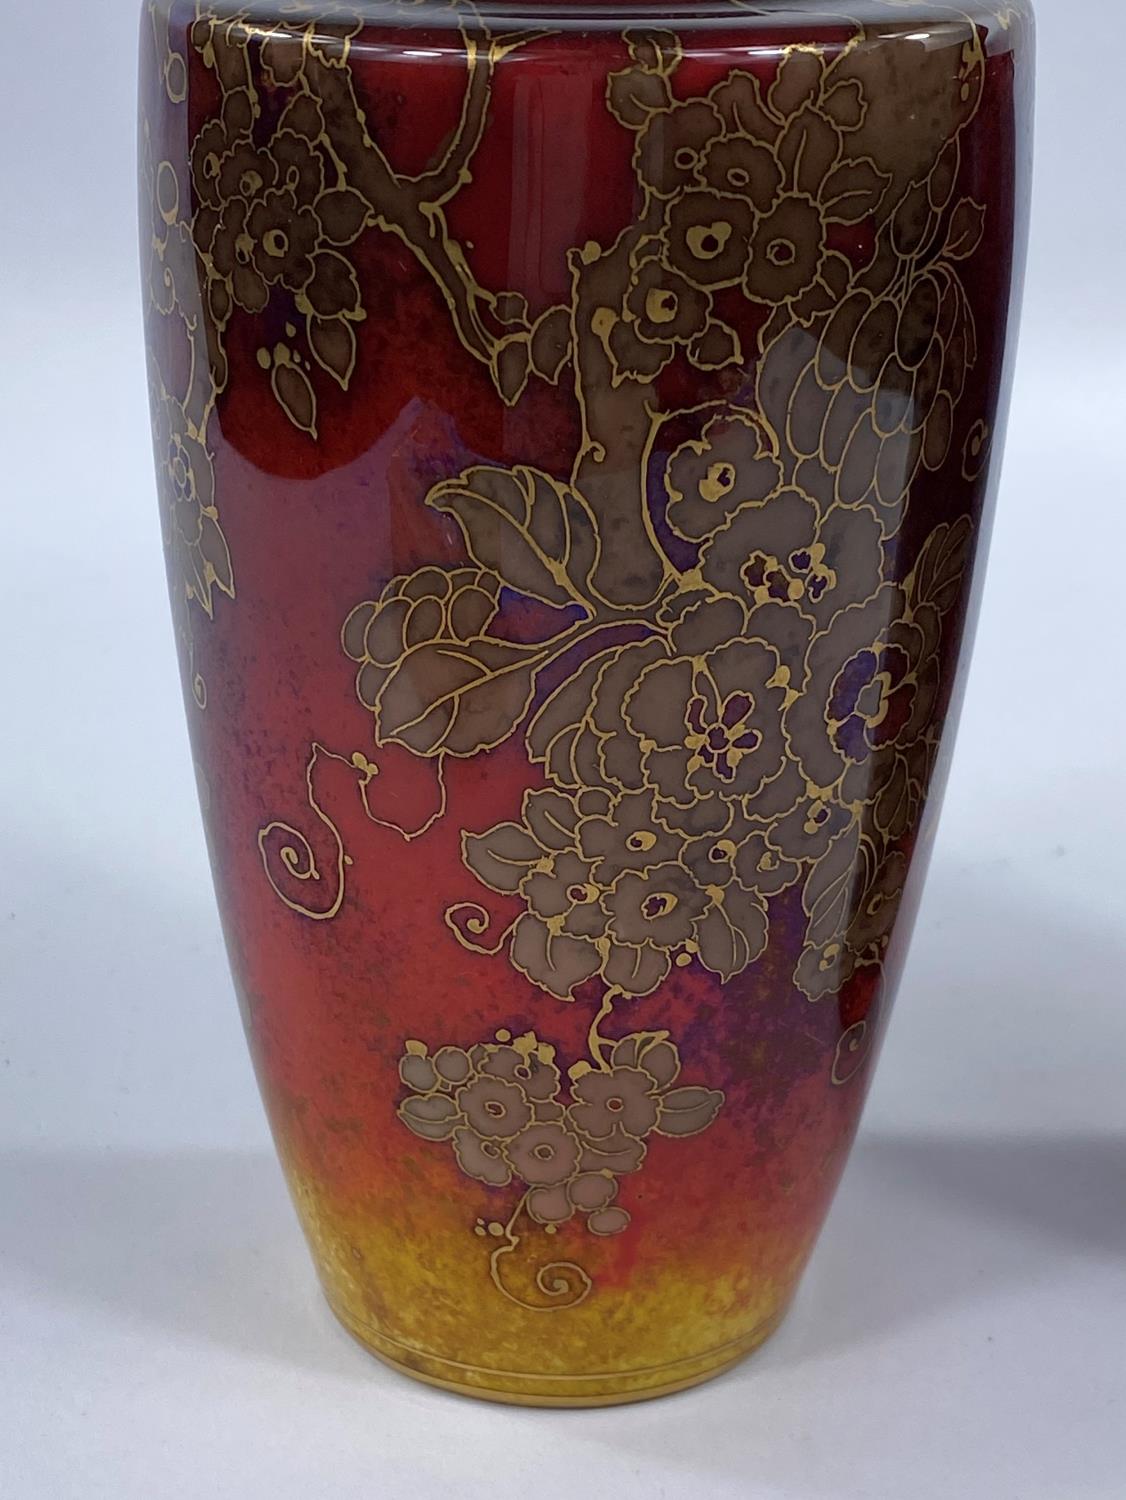 A Royal Doulton Flambe vase designed by Charles Noke, decorated with gilt highlights of Flamingos - Image 3 of 4